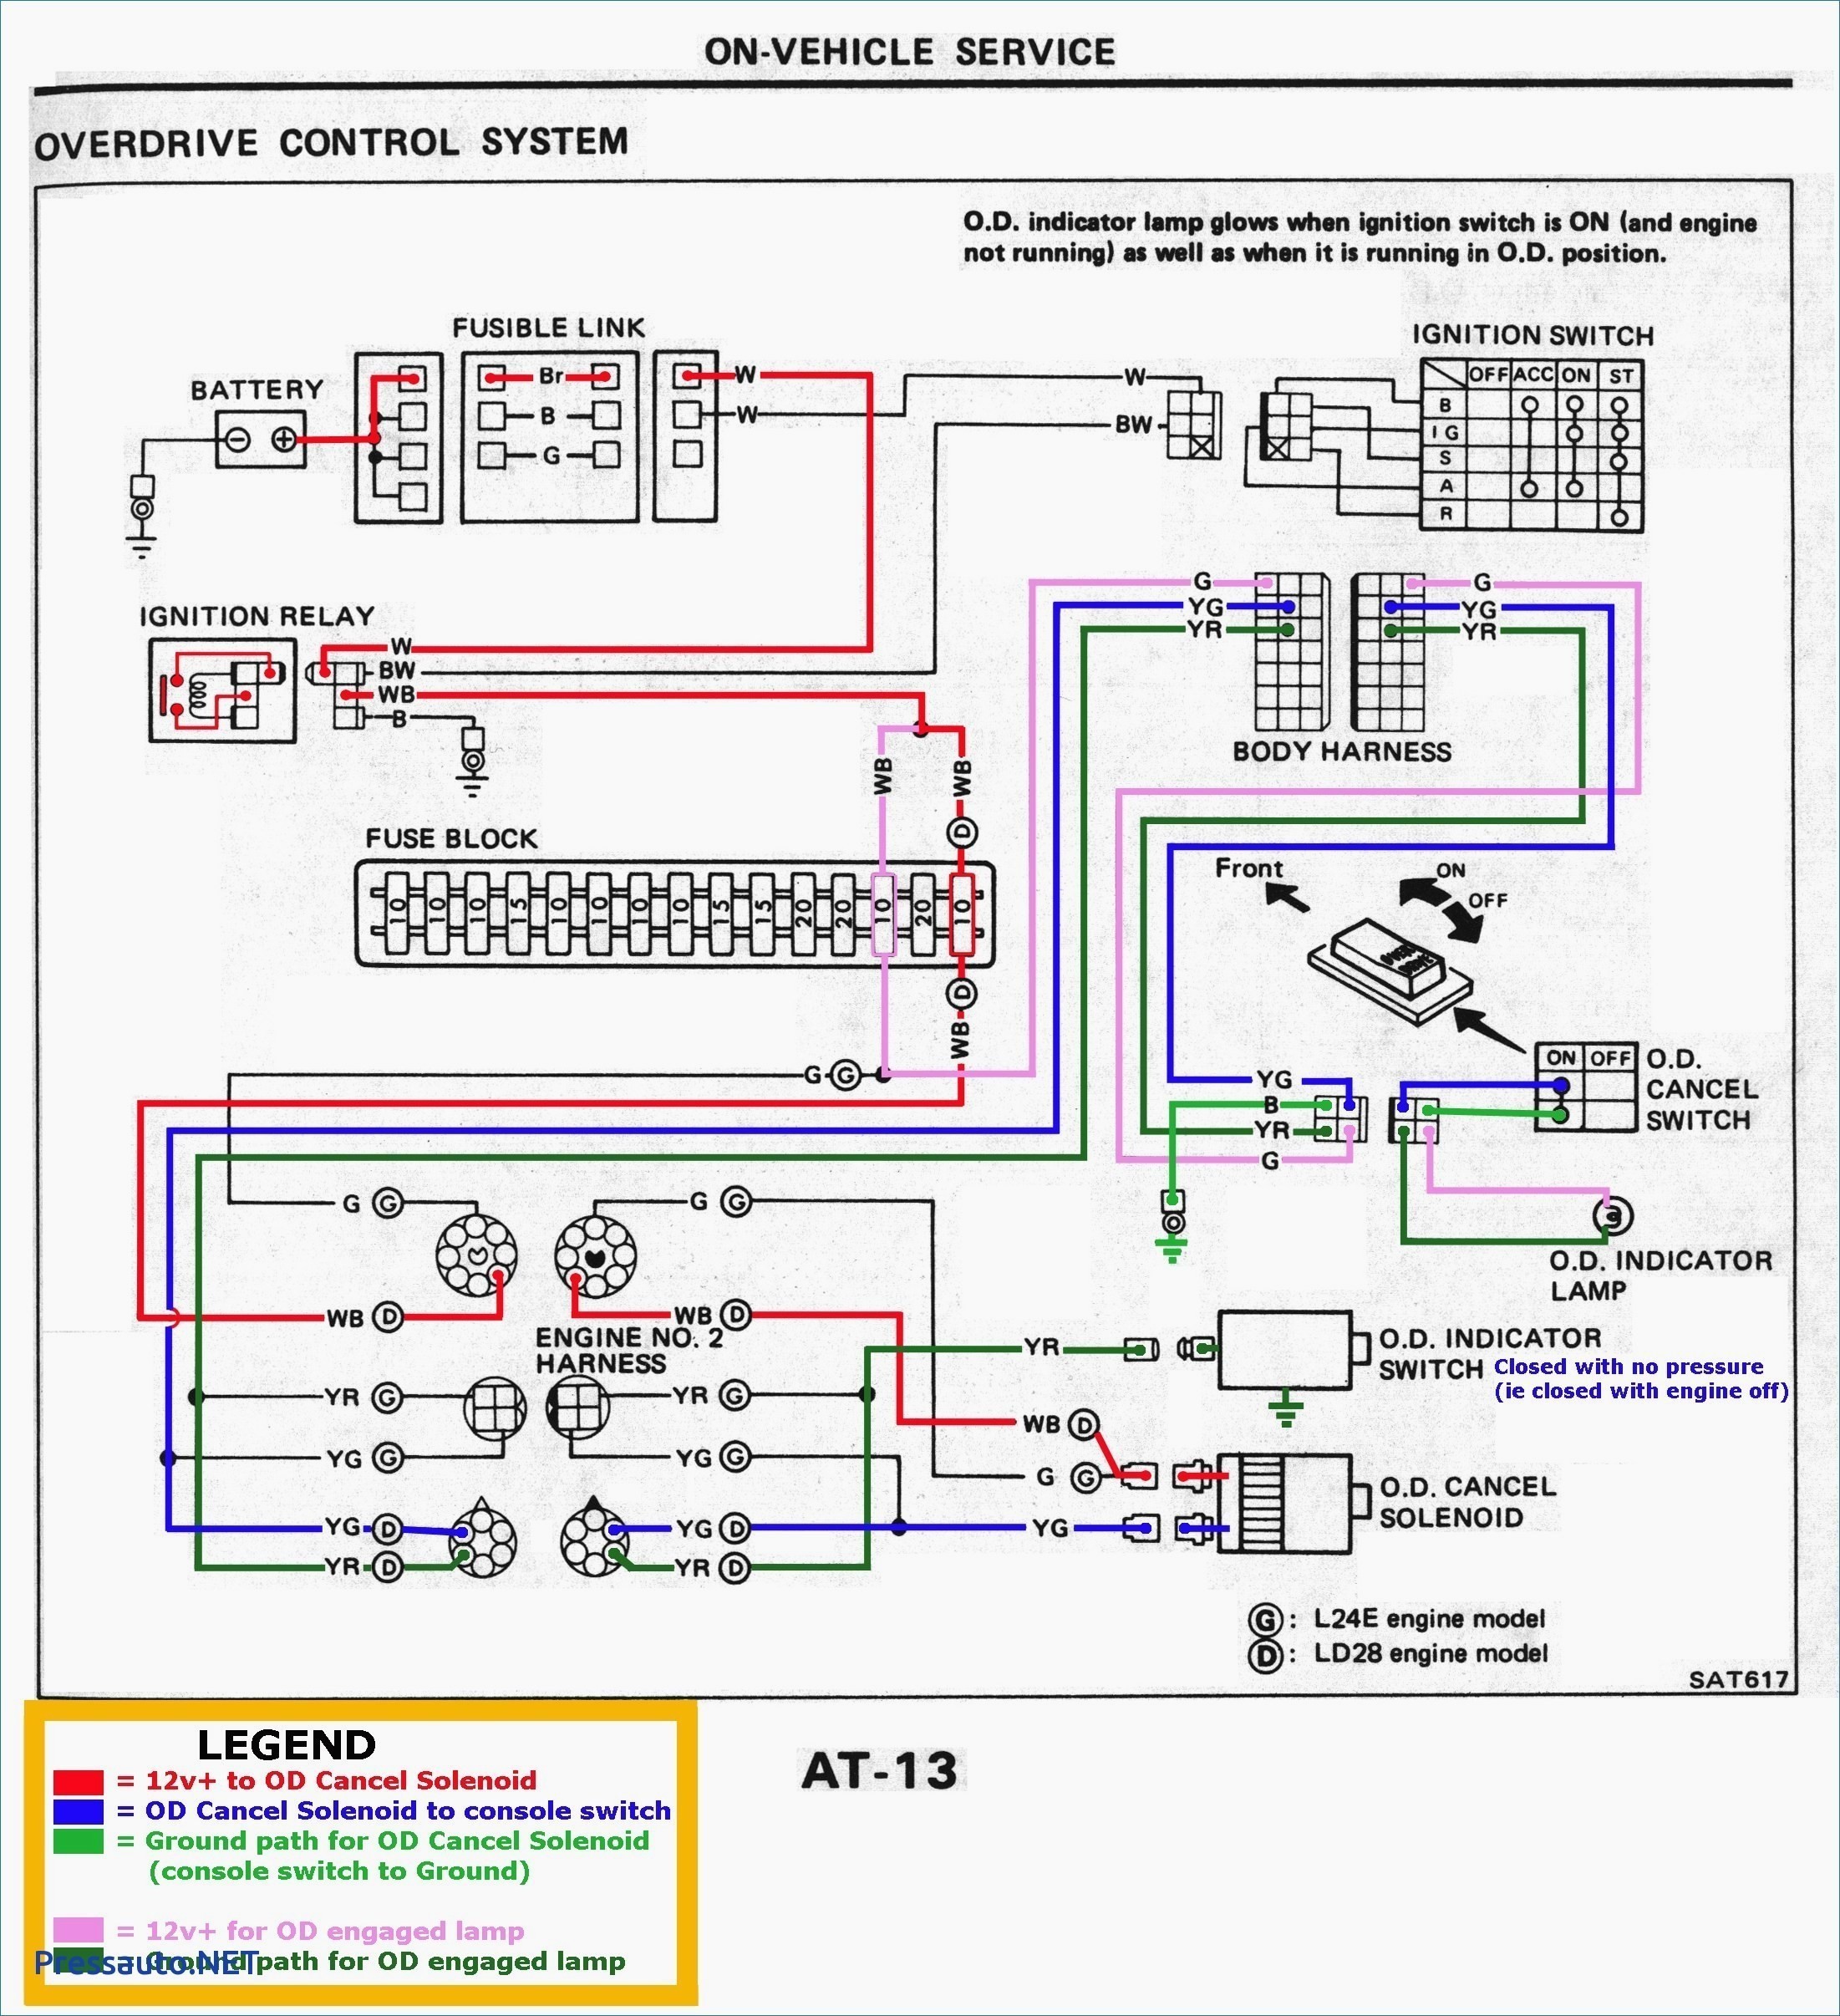 Ignition Switch Wiring Diagram Manual Valid Wiring Diagram for Universal Ignition Switch Refrence Ignition